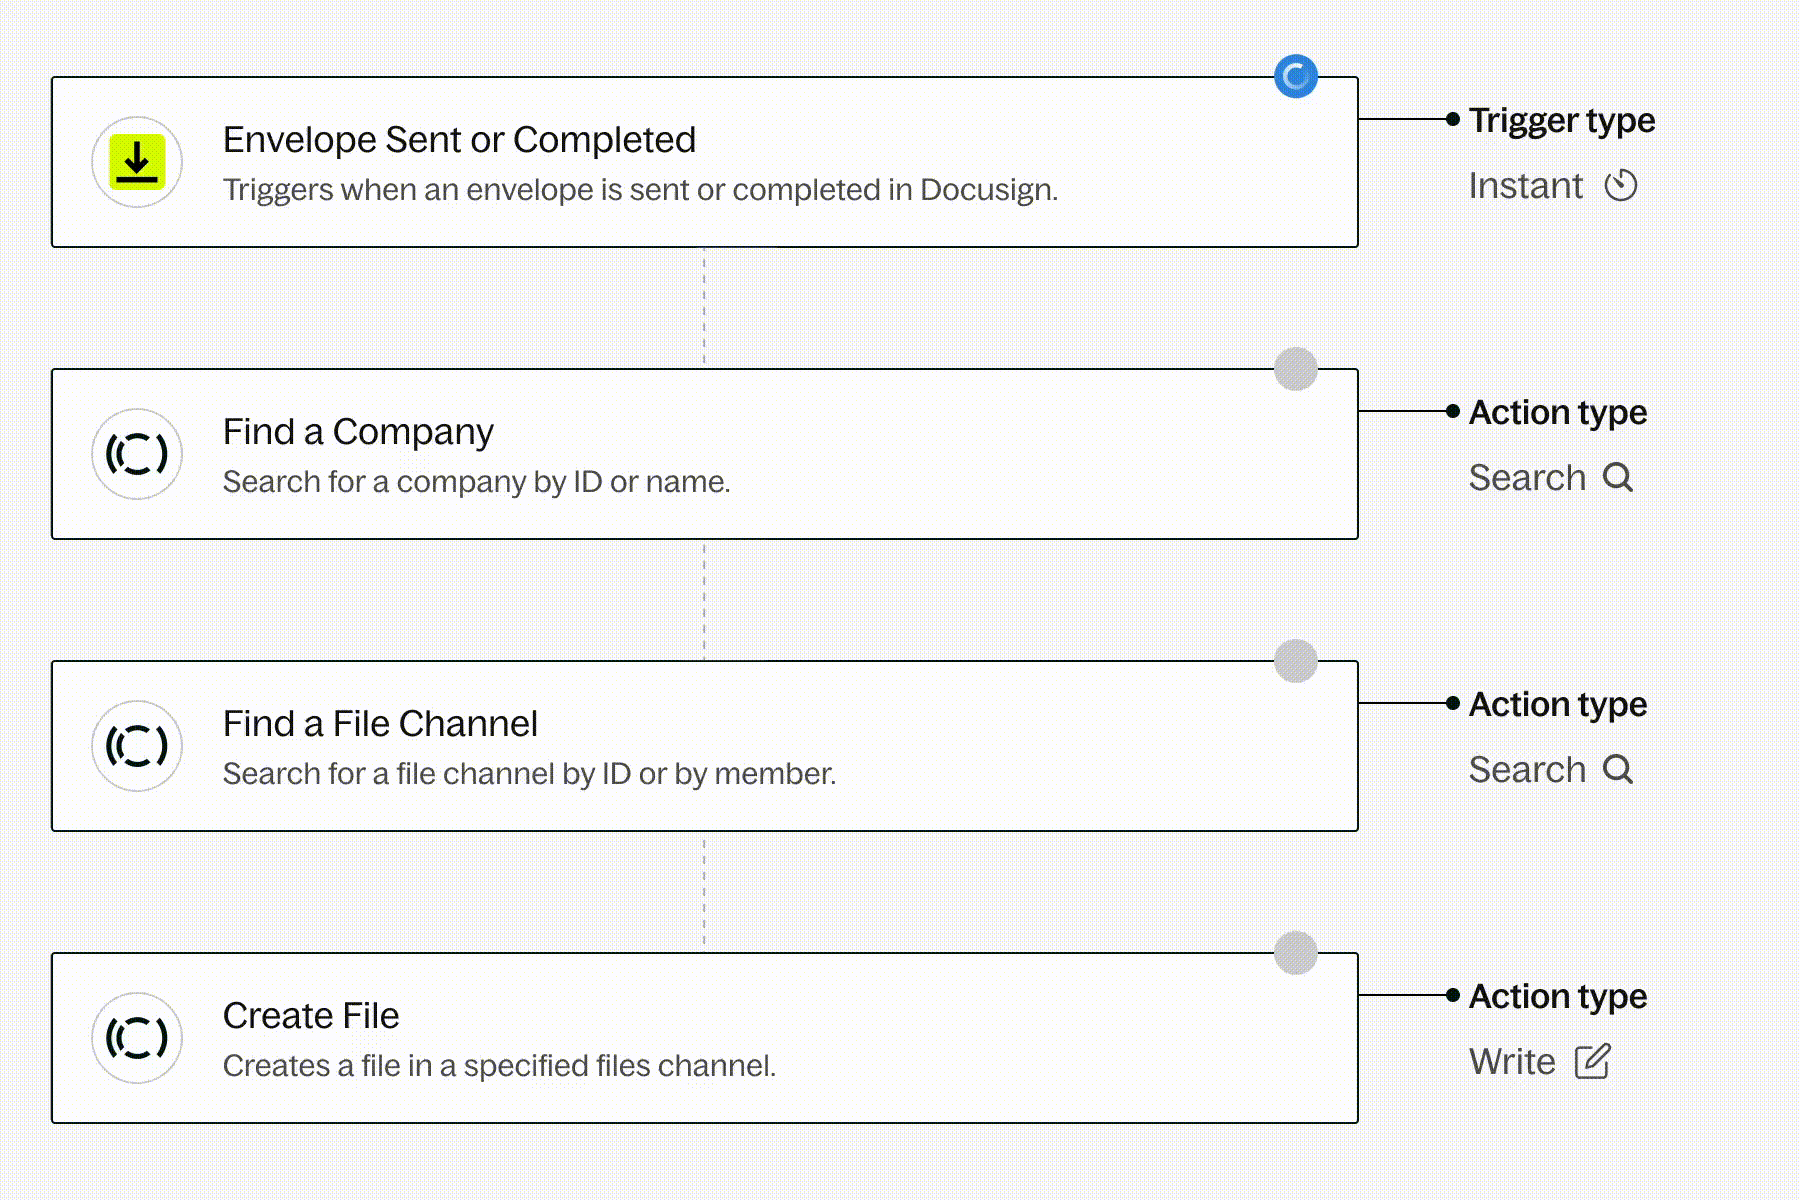 Upload files to company file channels in Copilot when envelopes are sent or  completed in Docusign